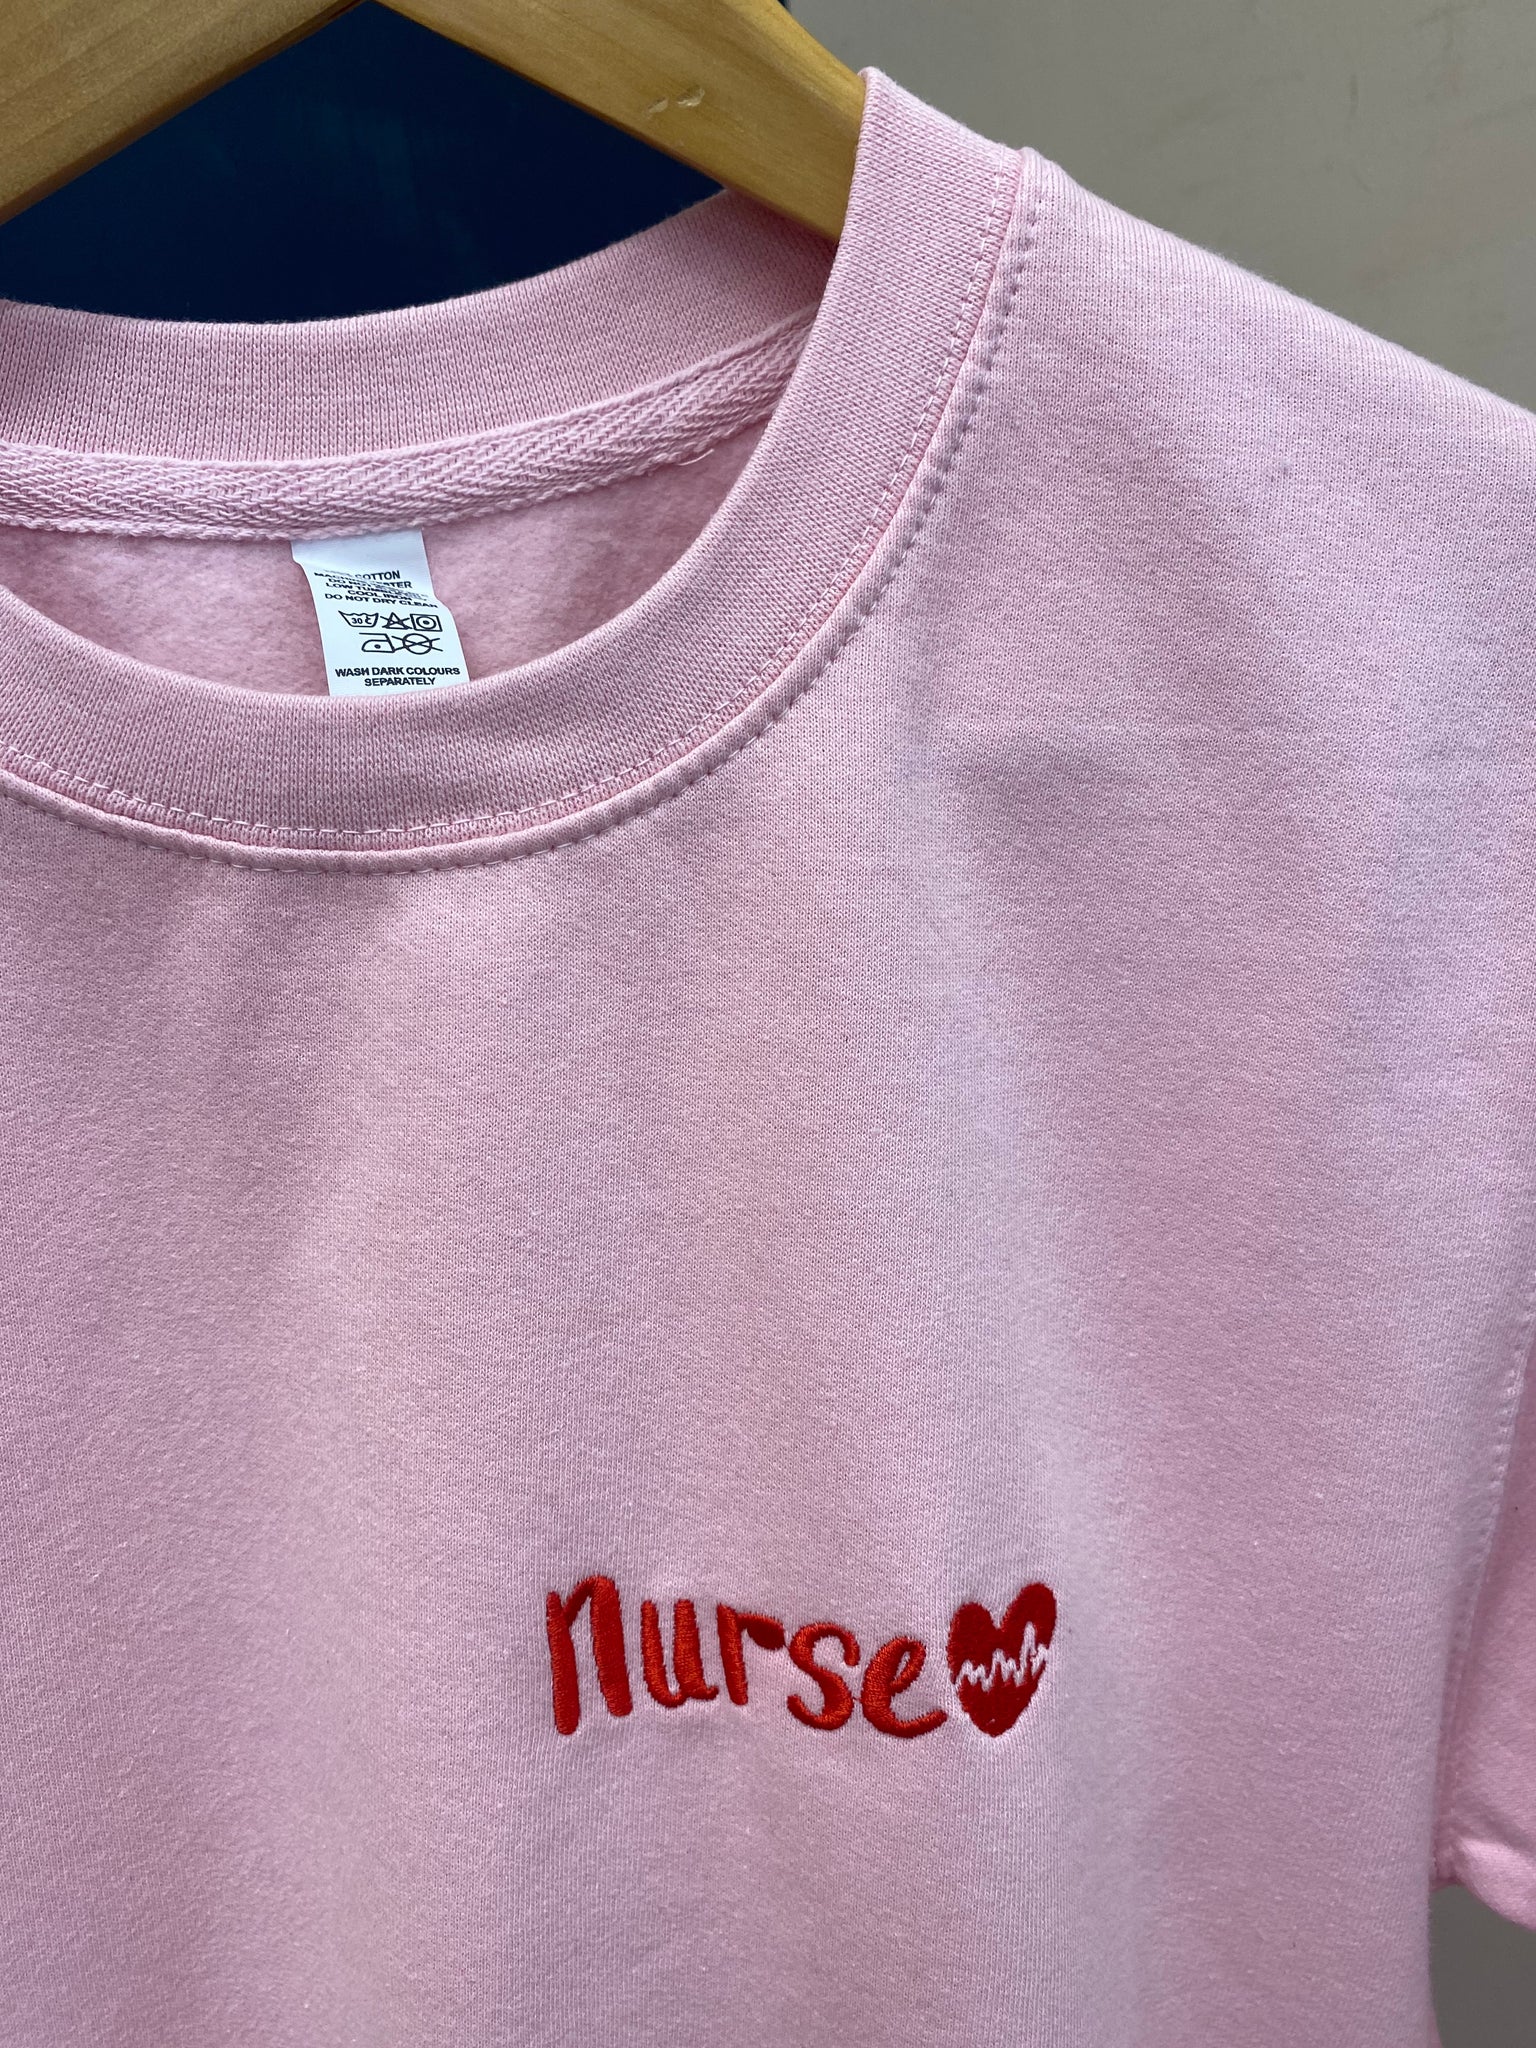 SAMPLE SALE 'Nurse' Baby Pink Sweater with Red Stitching, XS